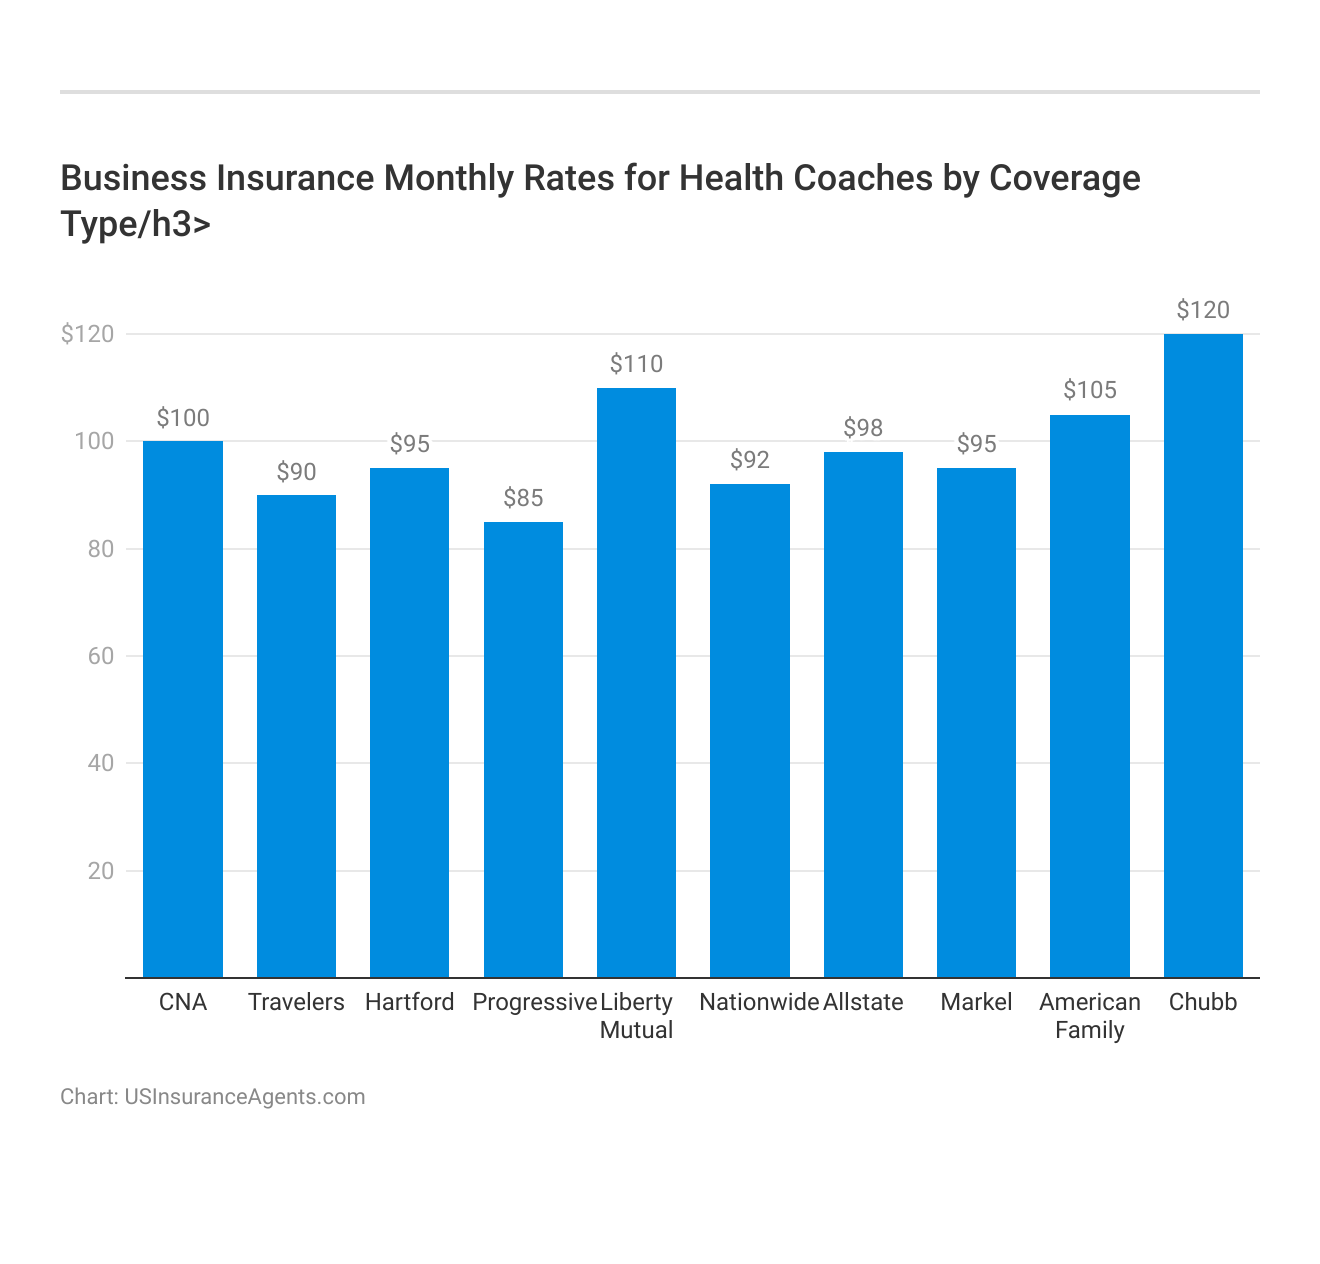 <h3>Business Insurance Monthly Rates for Health Coaches by Coverage Type/h3>